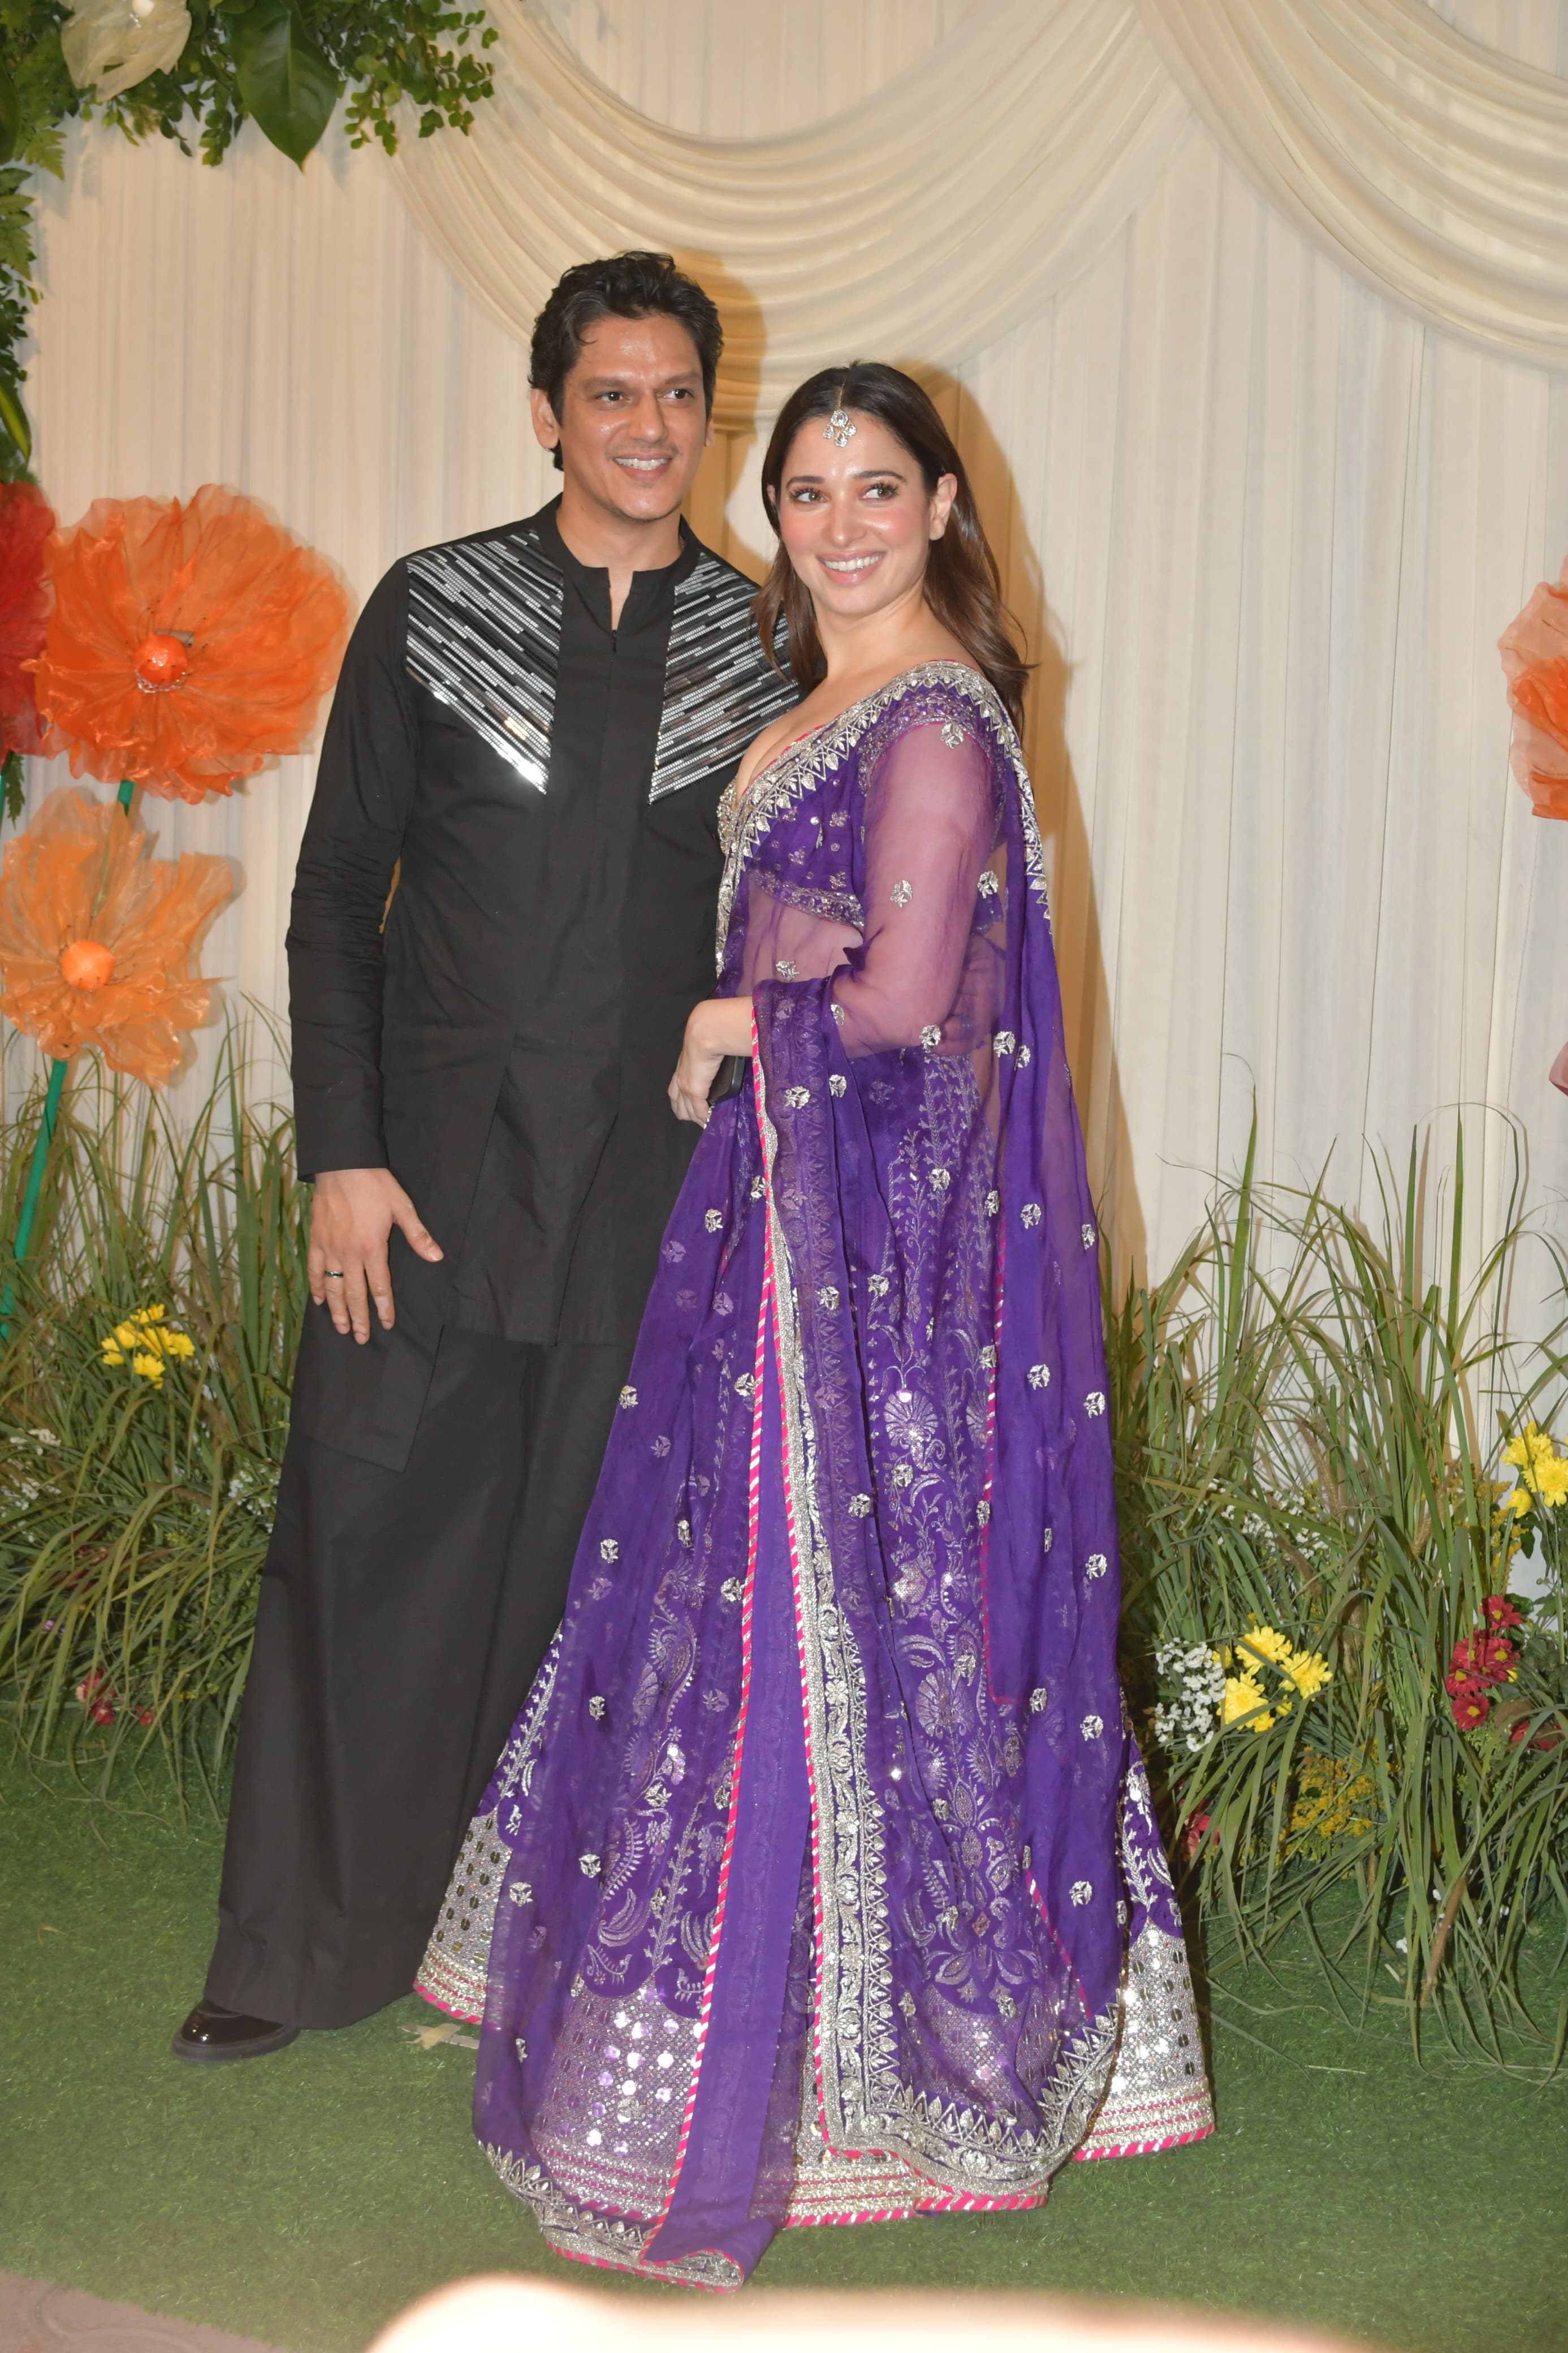 Power couple Tamannaah Bhatia and Vijay Varma looked stunning as the two came together for Shilpa Shetty's Diwali bash